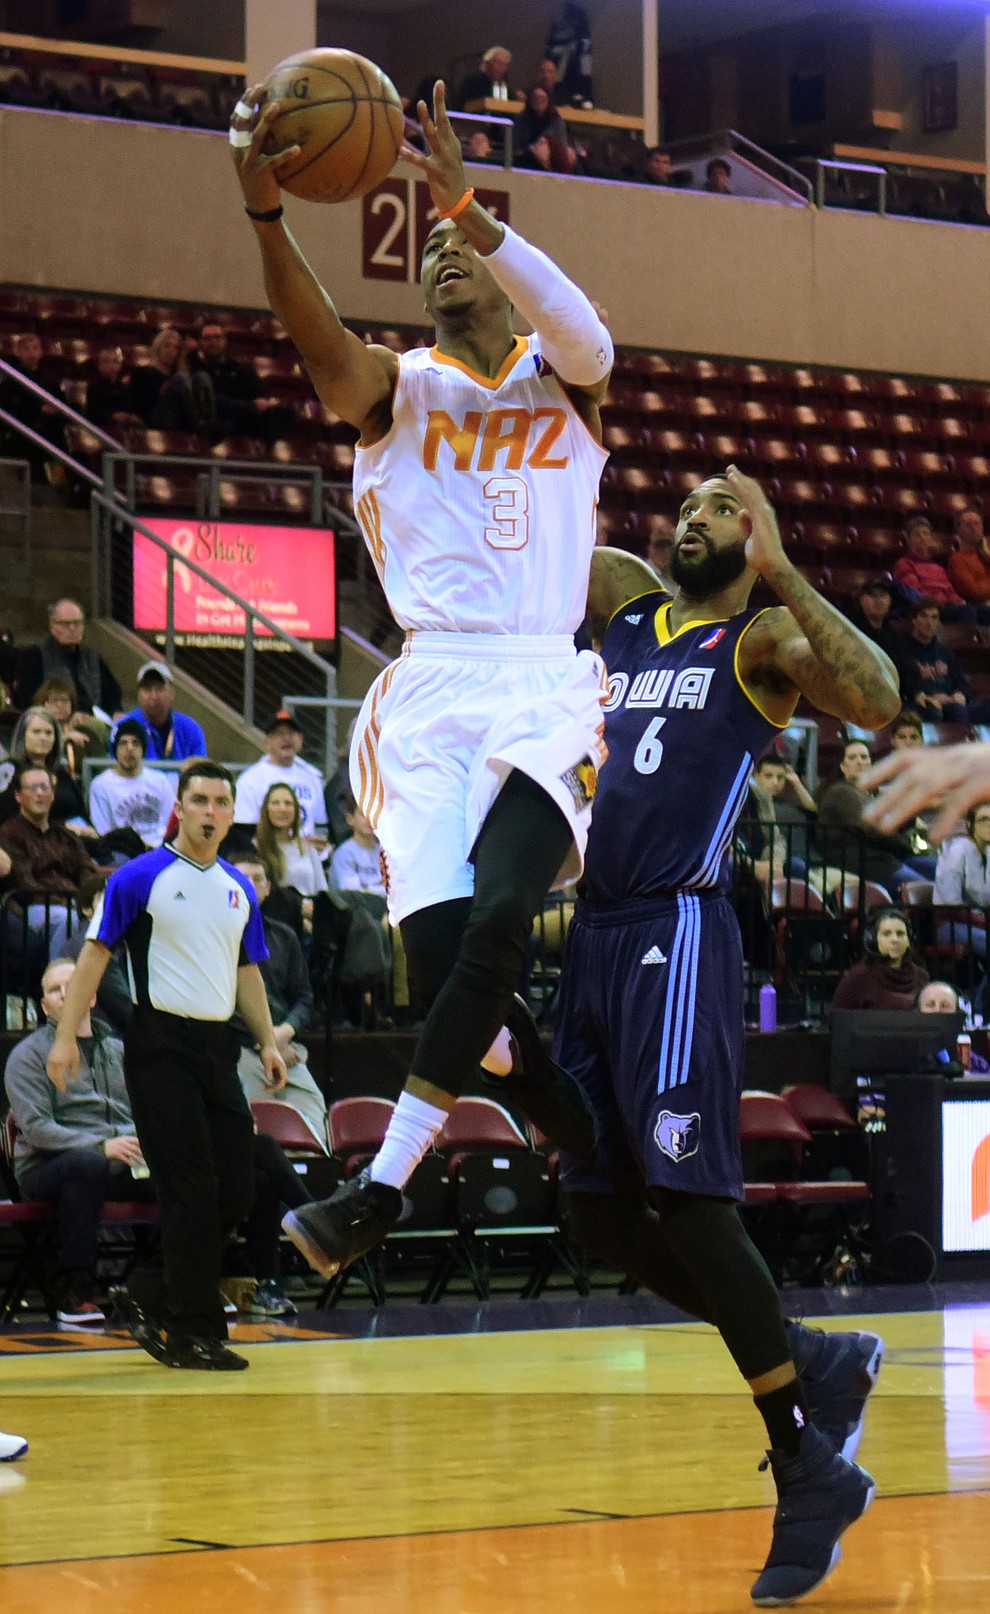 Northern Arizona's Shaquille Harrison goes to the basket as the Suns take on the Iowa Energy Saturday, December 10 at the Prescott Valley Event Center.  (Les Stukenberg/The Daily Courier)